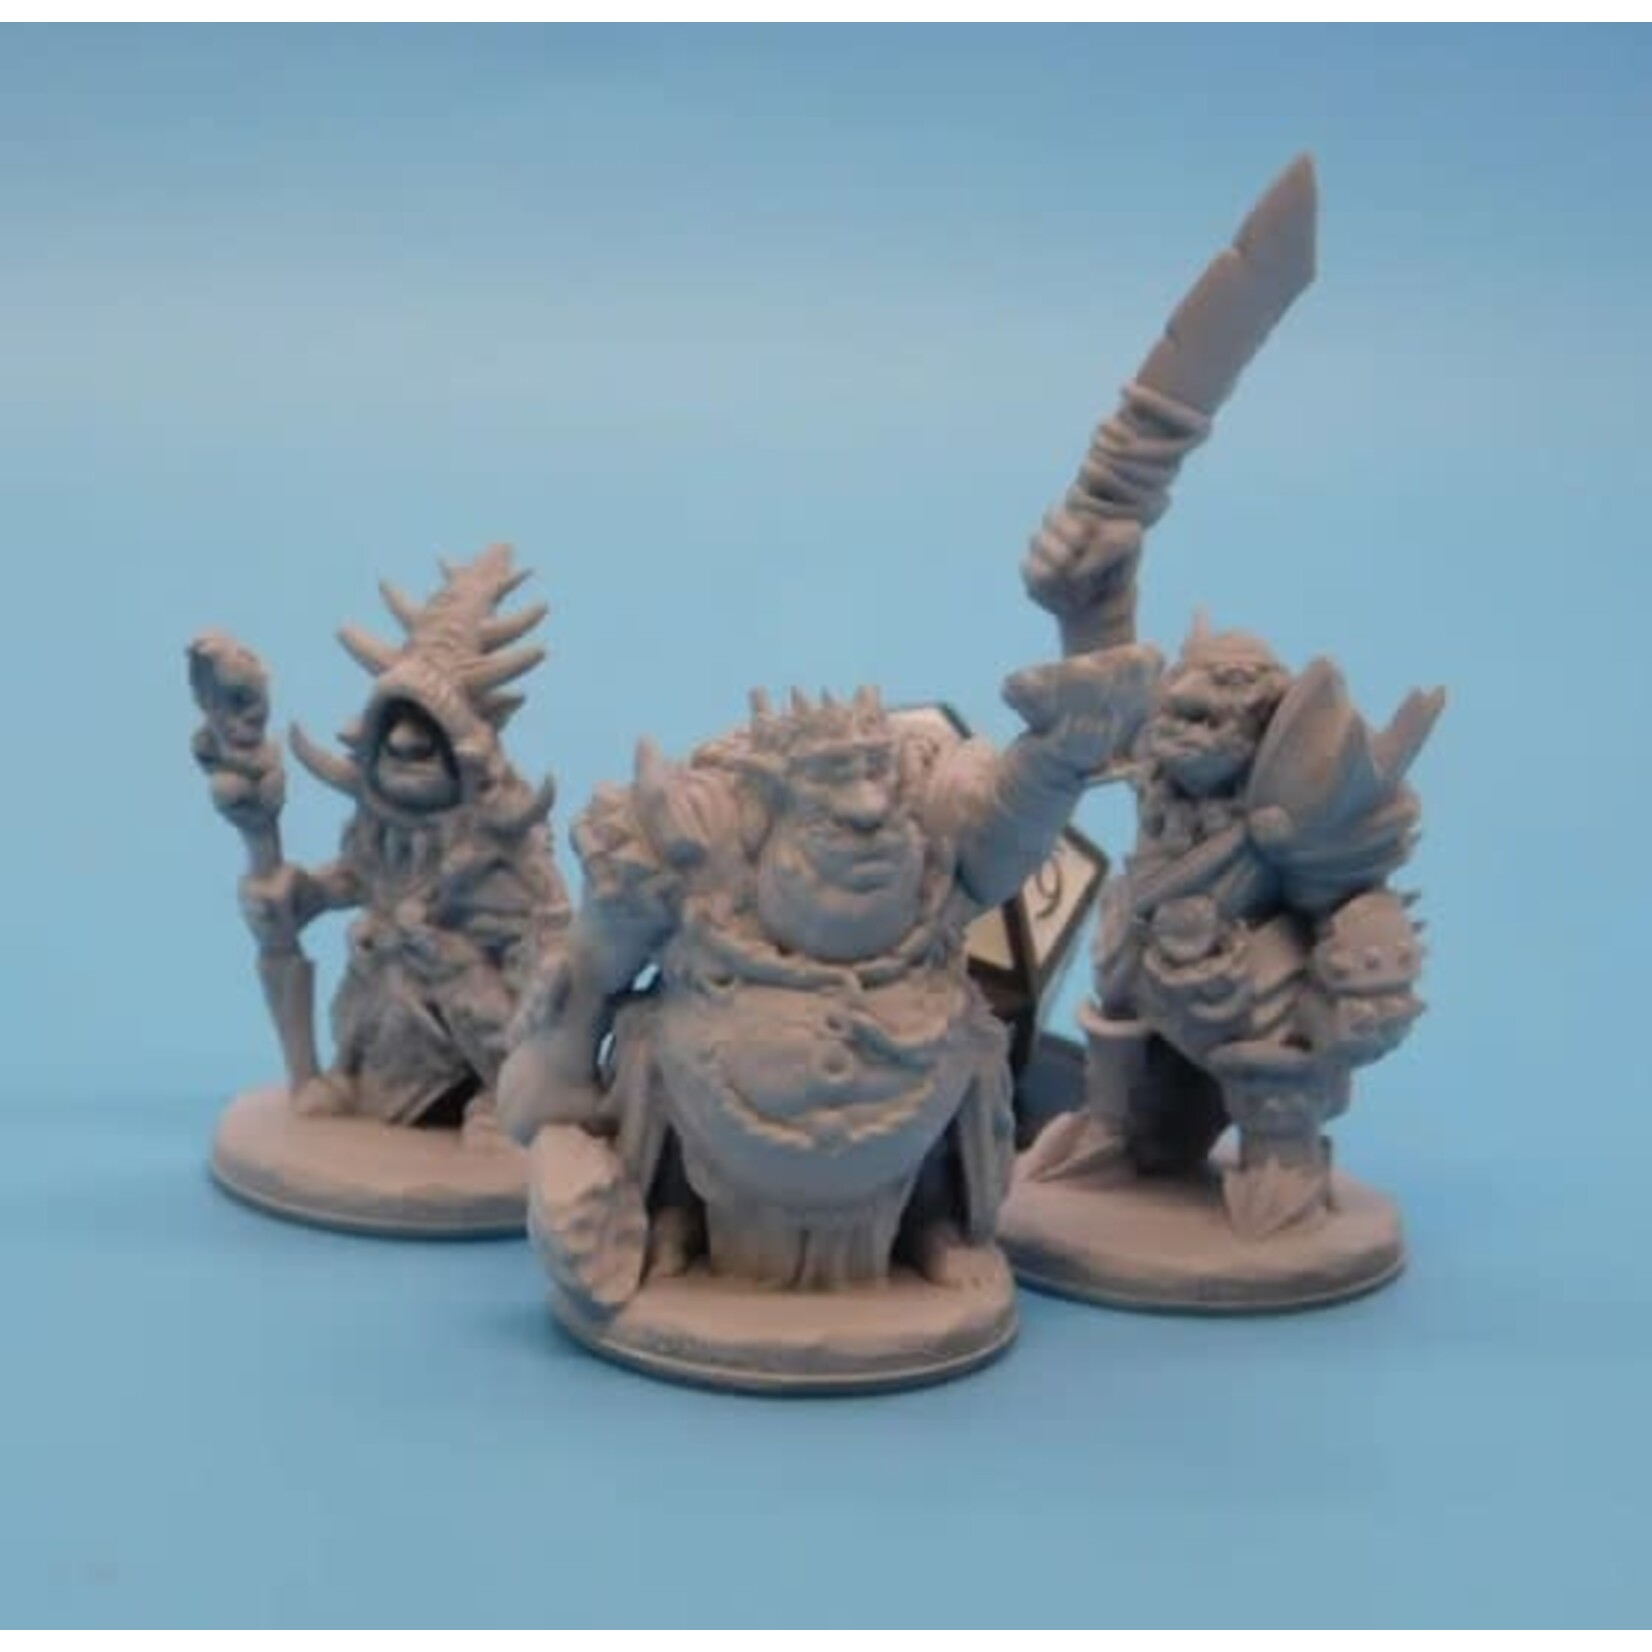 Dungeons & Dragons - Figurines - Goblin Leaders (3 pieces)